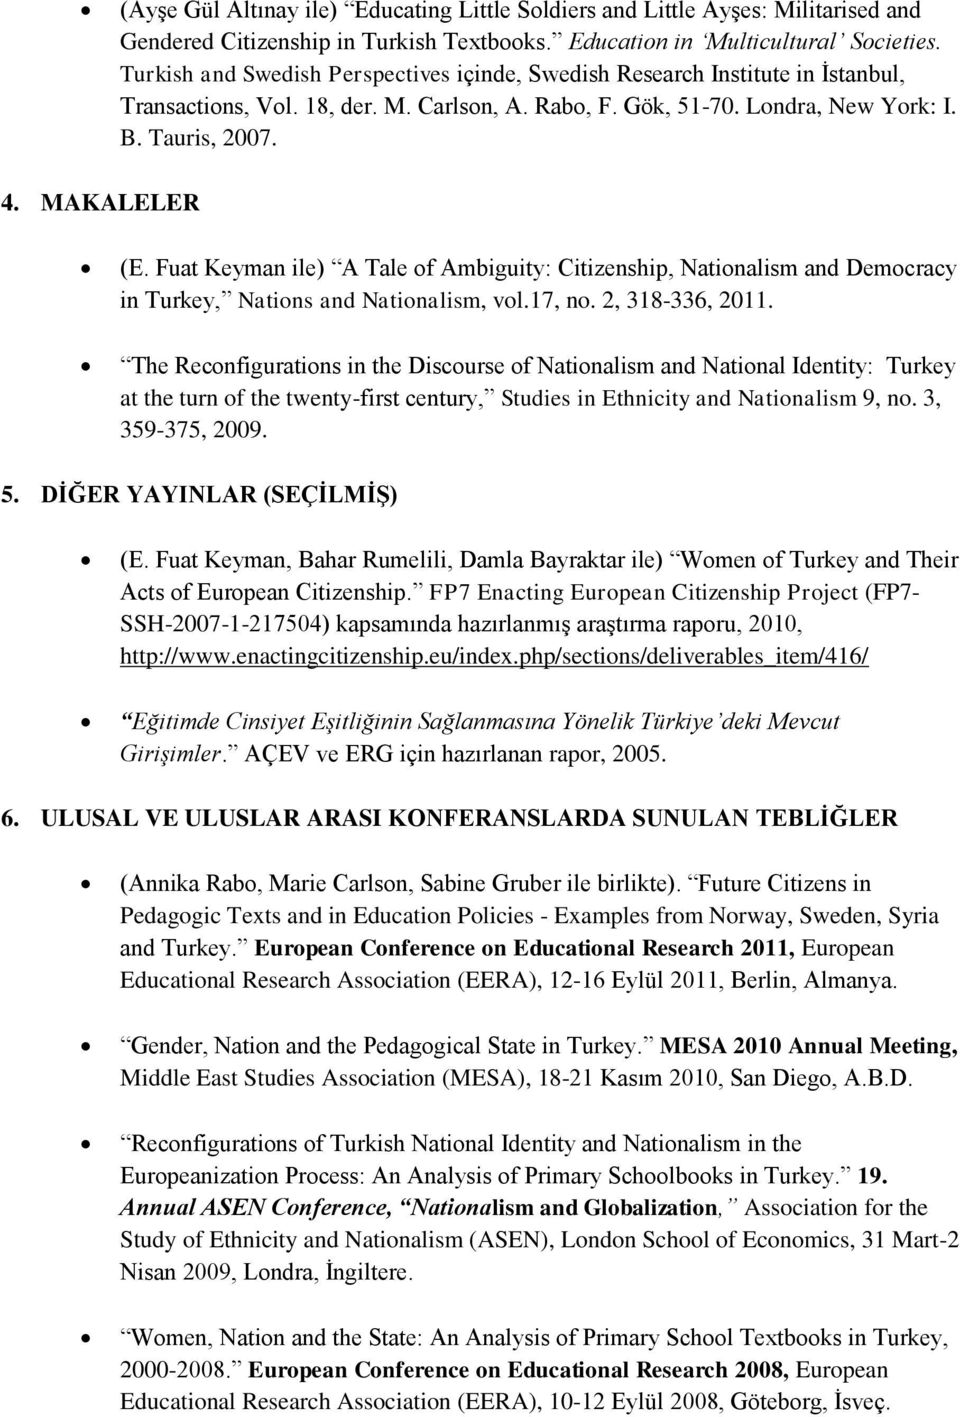 Fuat Keyman ile) A Tale of Ambiguity: Citizenship, Nationalism and Democracy in Turkey, Nations and Nationalism, vol.17, no. 2, 318-336, 2011.